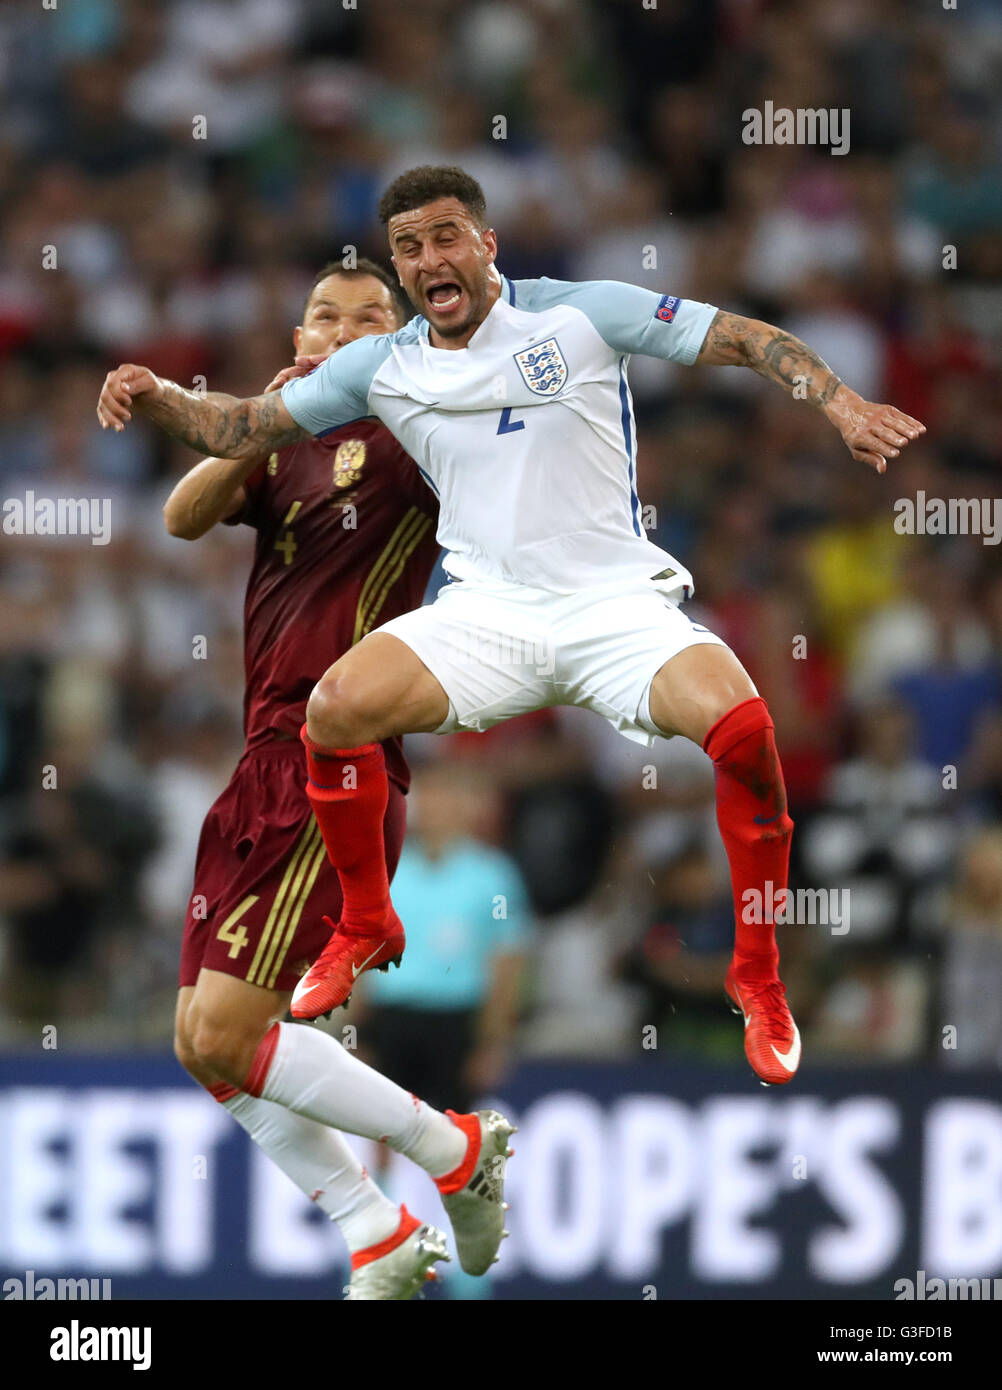 Russia's Sergei Ignashevich and England's Kyle Walker (right) battle for the ball in the air during the UEFA Euro 2016, Group B match at the Stade Velodrome, Marseille. Stock Photo